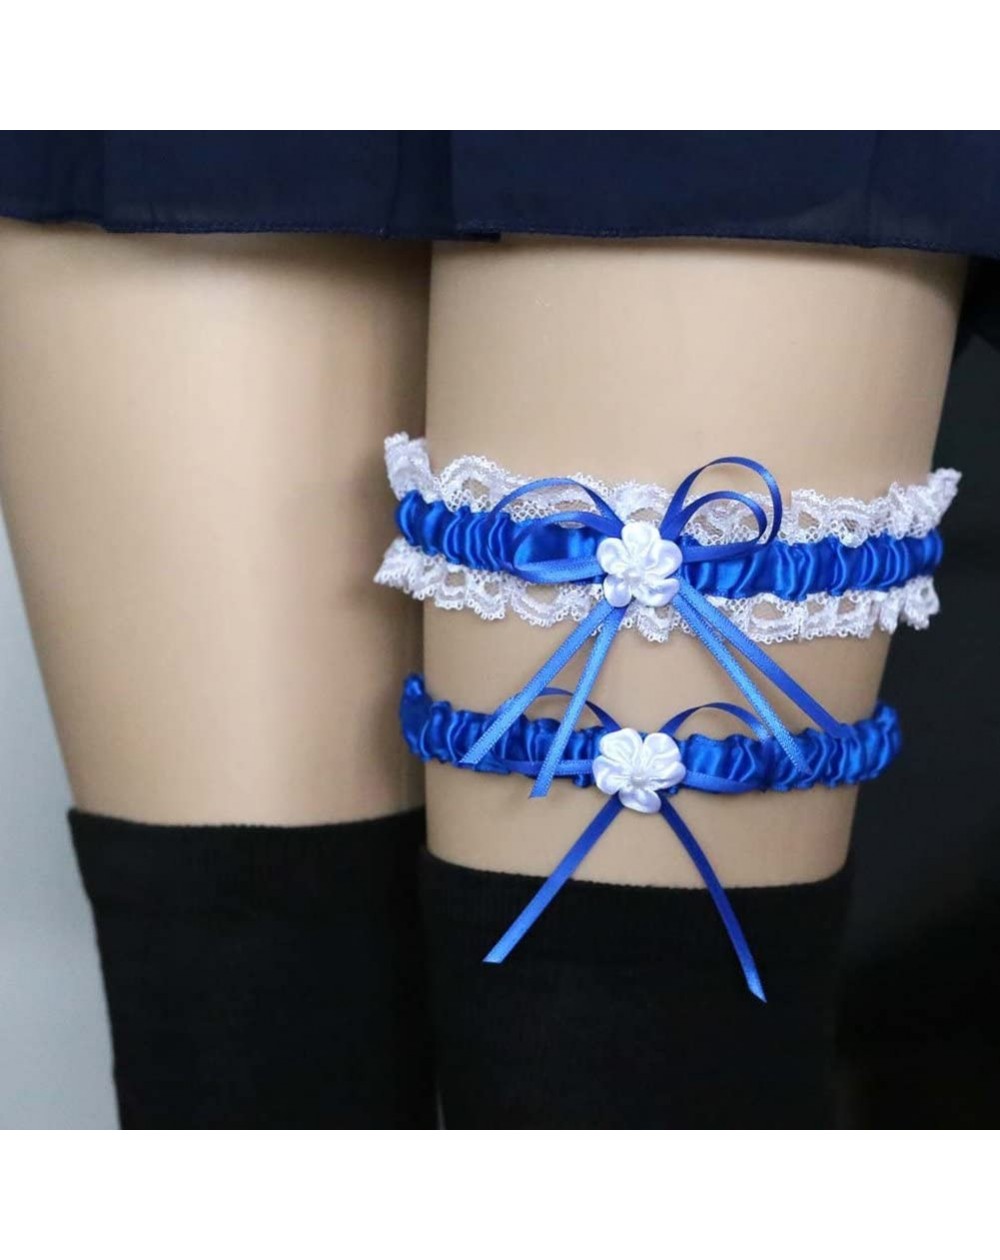 Adult Novelty 2Pcs/Set Lace Wedding Garter- Sexy Bridal Leg Belt Thigh Ring with Bowknot-Cosplay Decor for Women - Royal Blue...